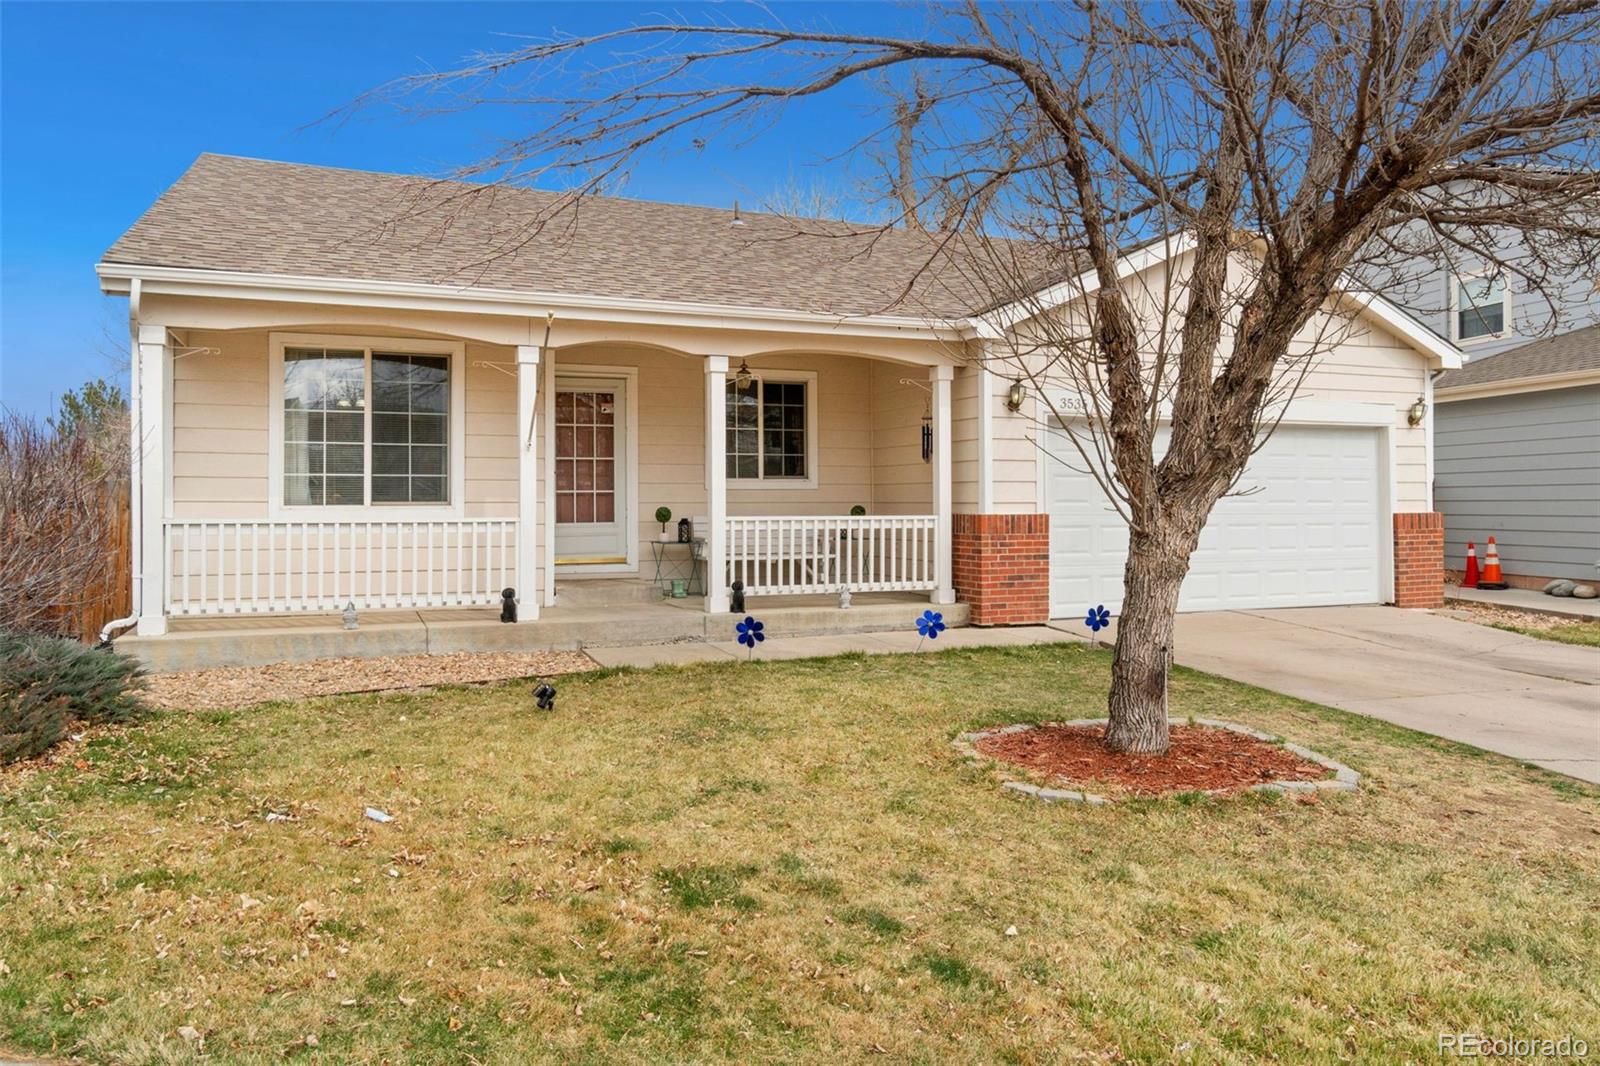 3535 e 104th place, northglenn sold home. Closed on 2024-04-30 for $580,000.